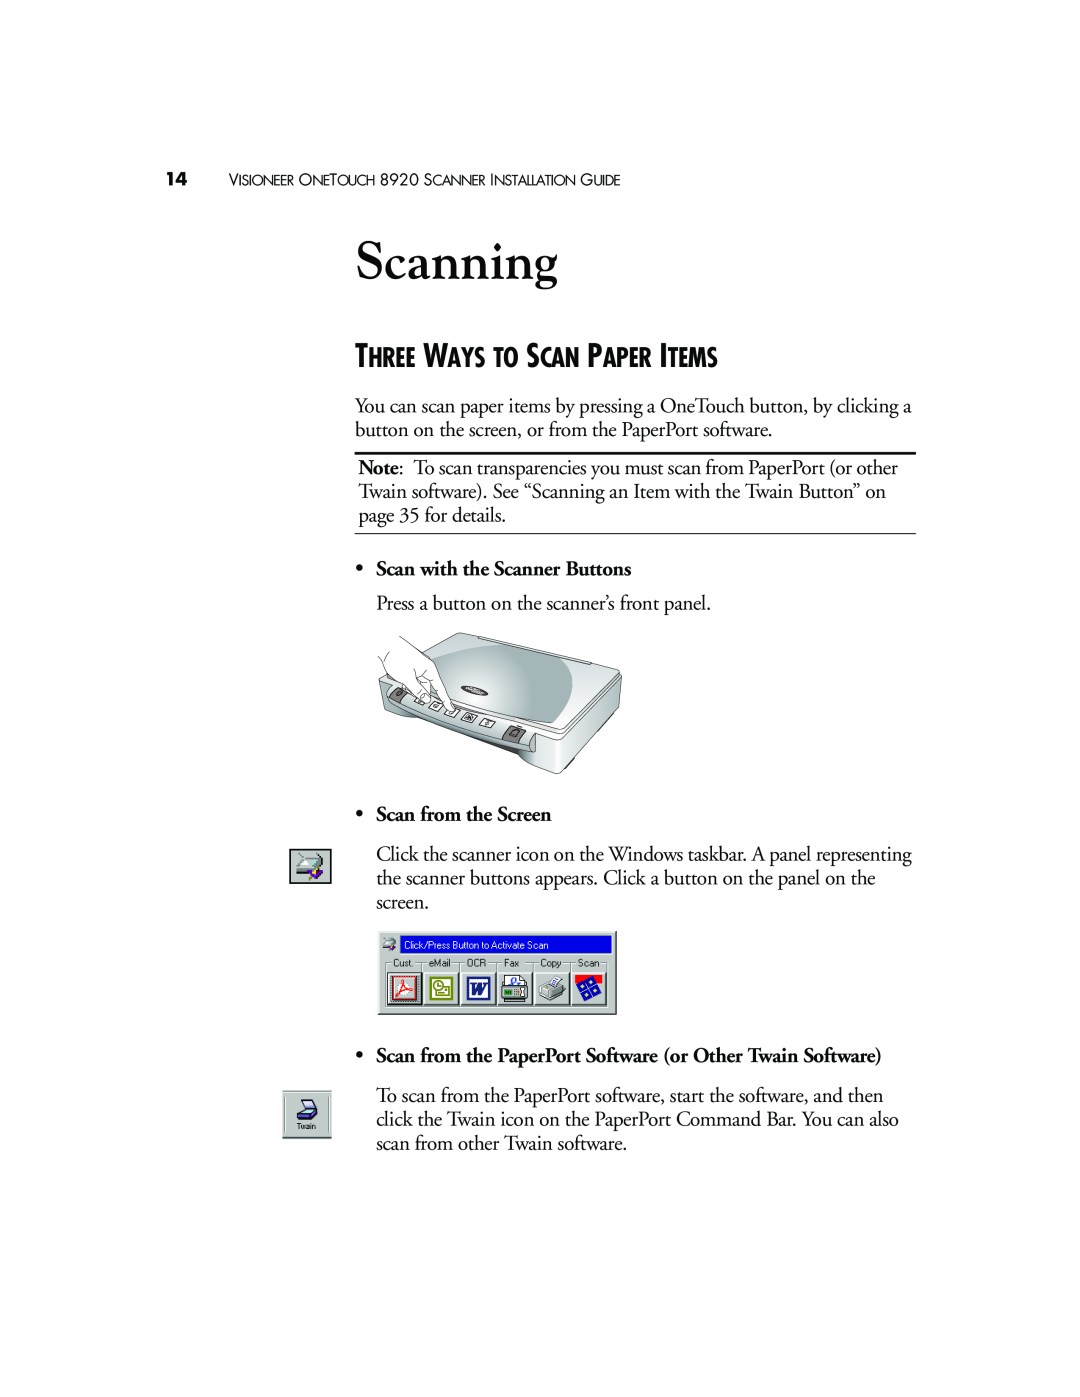 Visioneer 8920 manual Scanning, Three Ways To Scan Paper Items 